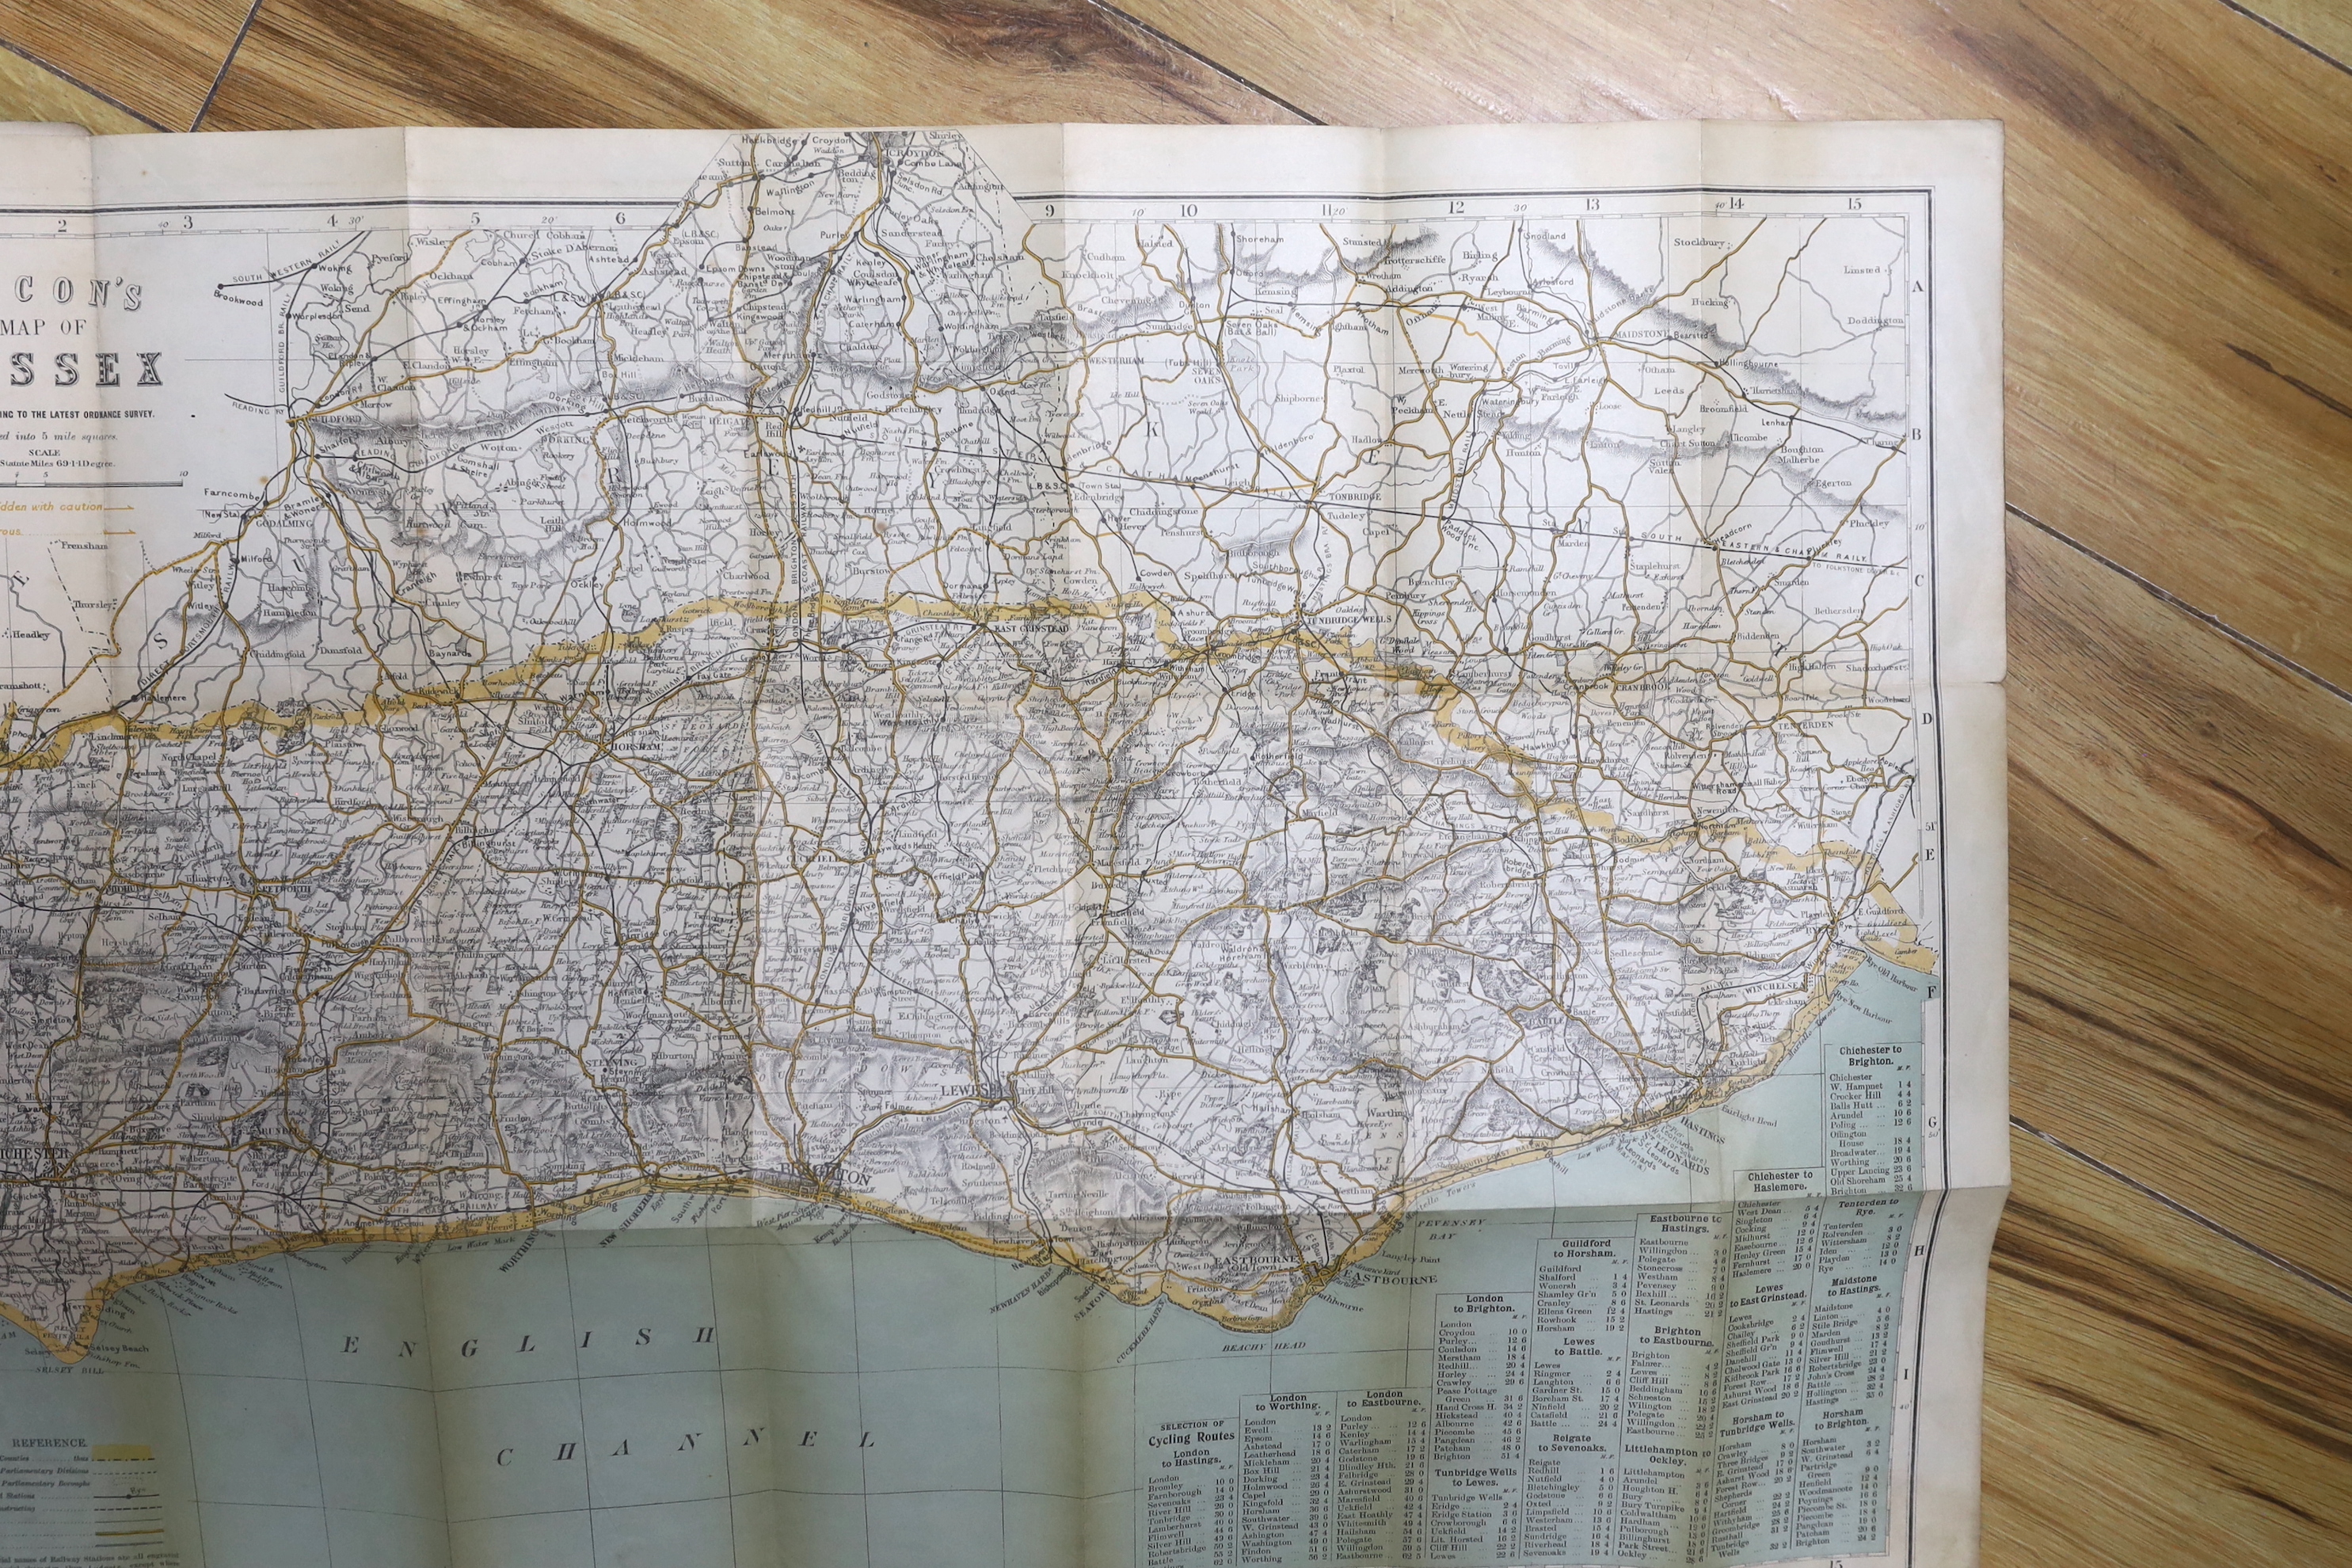 Seven 19th and 20th century folding maps of Sussex; a Pocket County Map series, pub. Chapman and Hall, a Cruchley’s County Map, a Gall & Inglis County Map, a Letts Son & Co. map, a Bacon’s County Map, a Bartholomew’s map